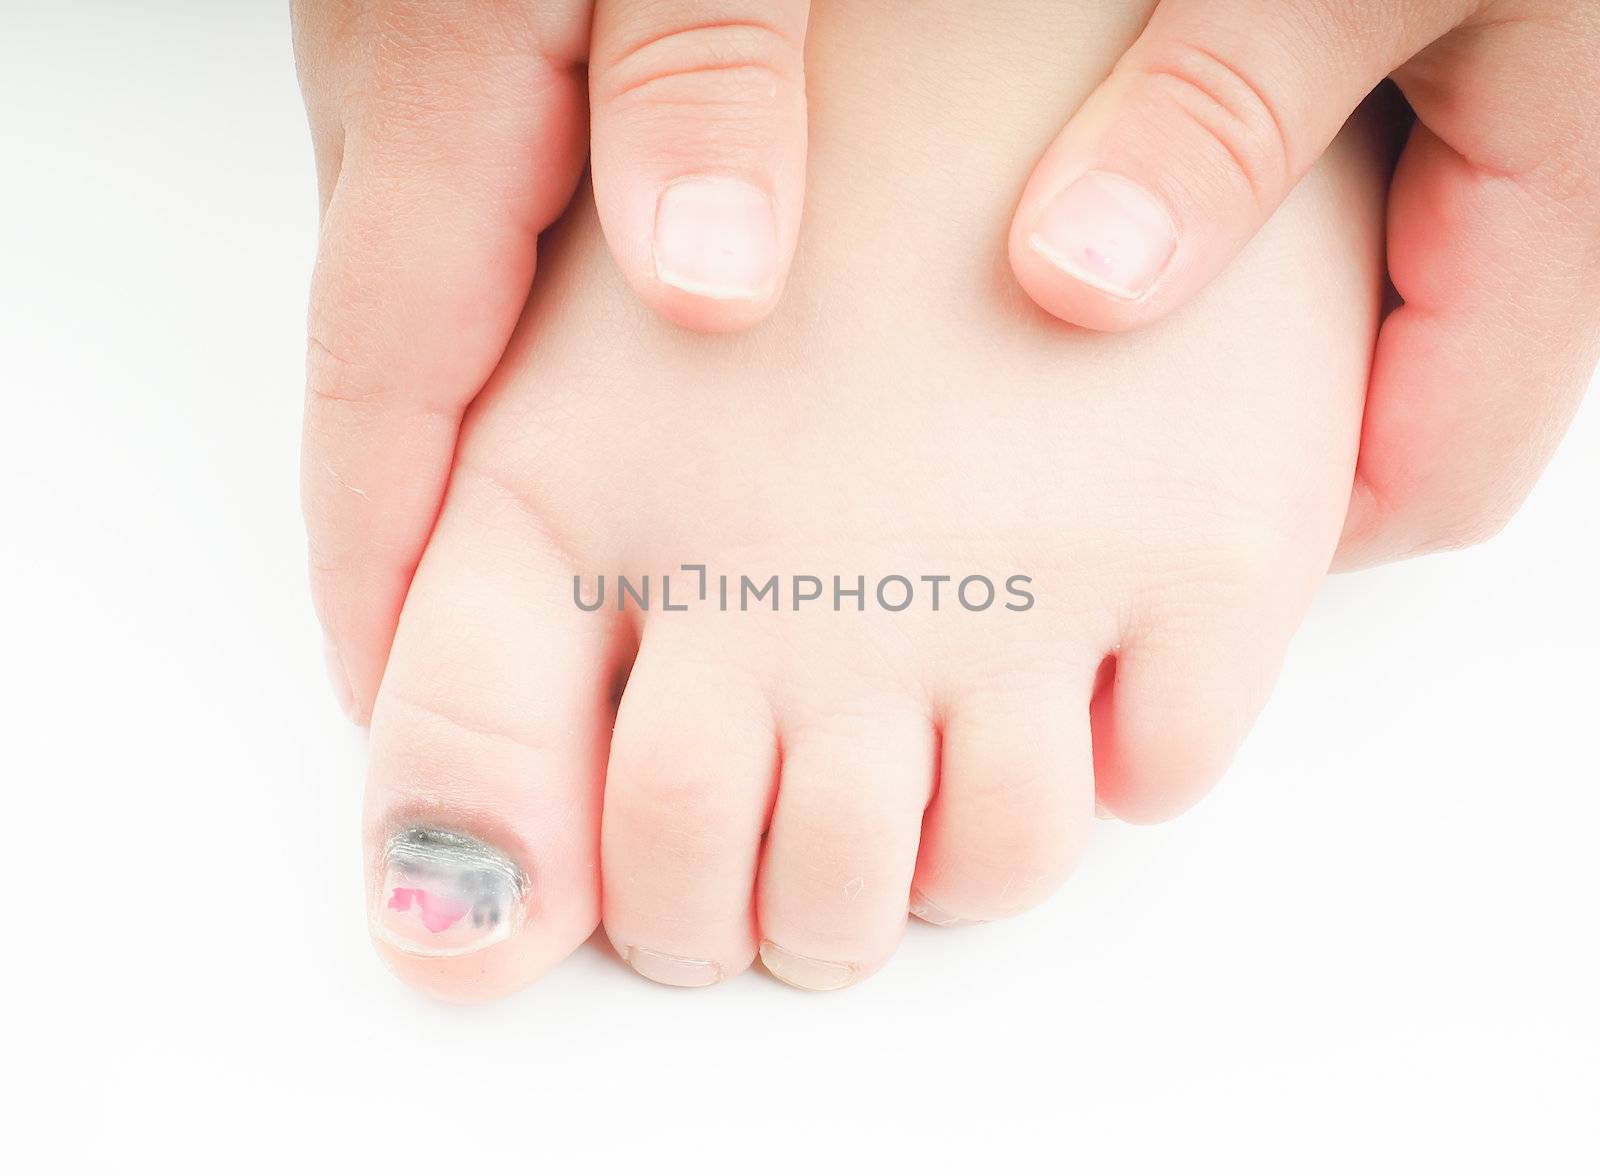 Little girl holding onto  her foot with an injured big toe, showing blue nail on the hallux, with a tiny bit of pink pedicure left